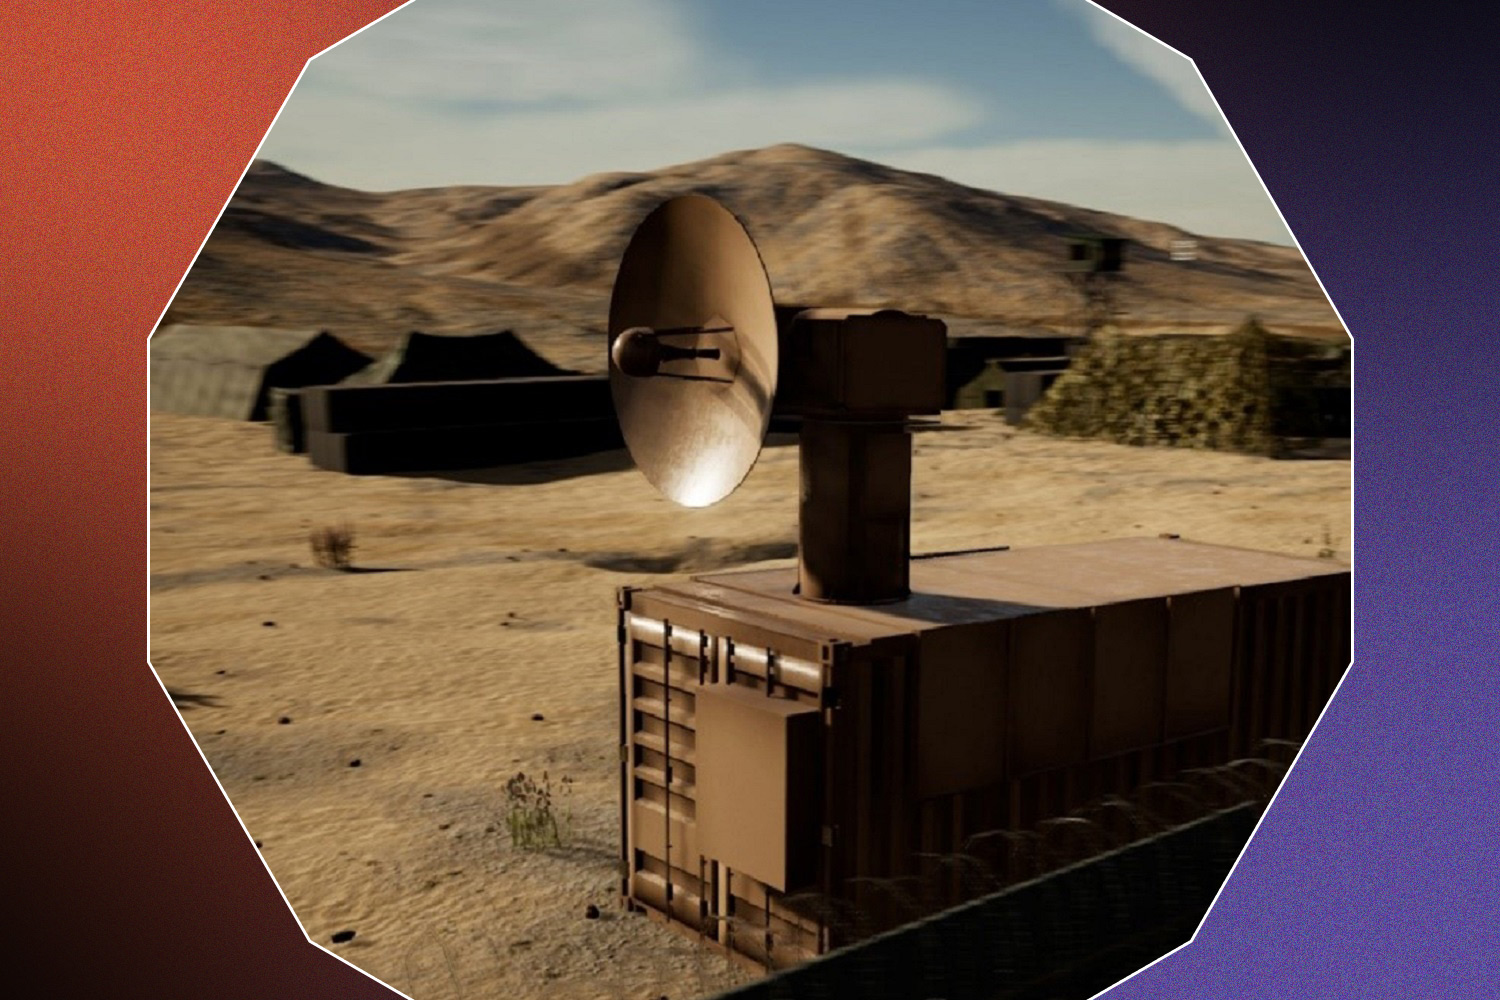 THOR anti-drone defense system microwave dish in the New Mexico desert on a red, black, and purple background